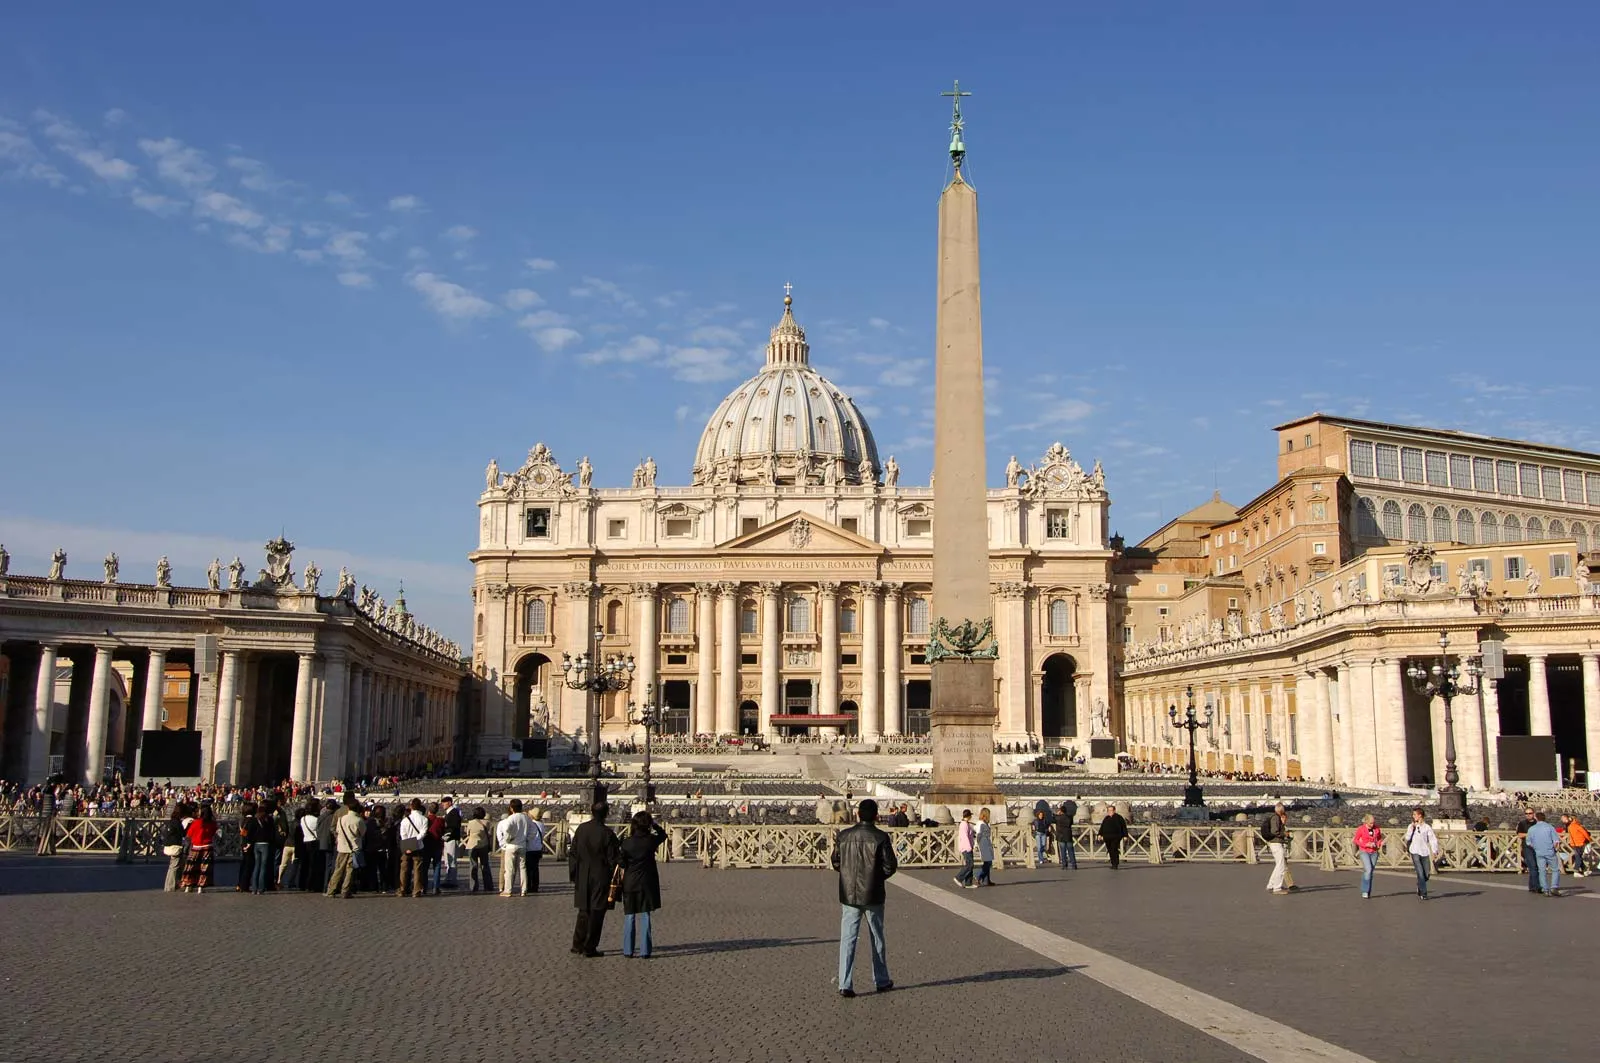 1506 Construction of the current St. Peter's Basilica begins